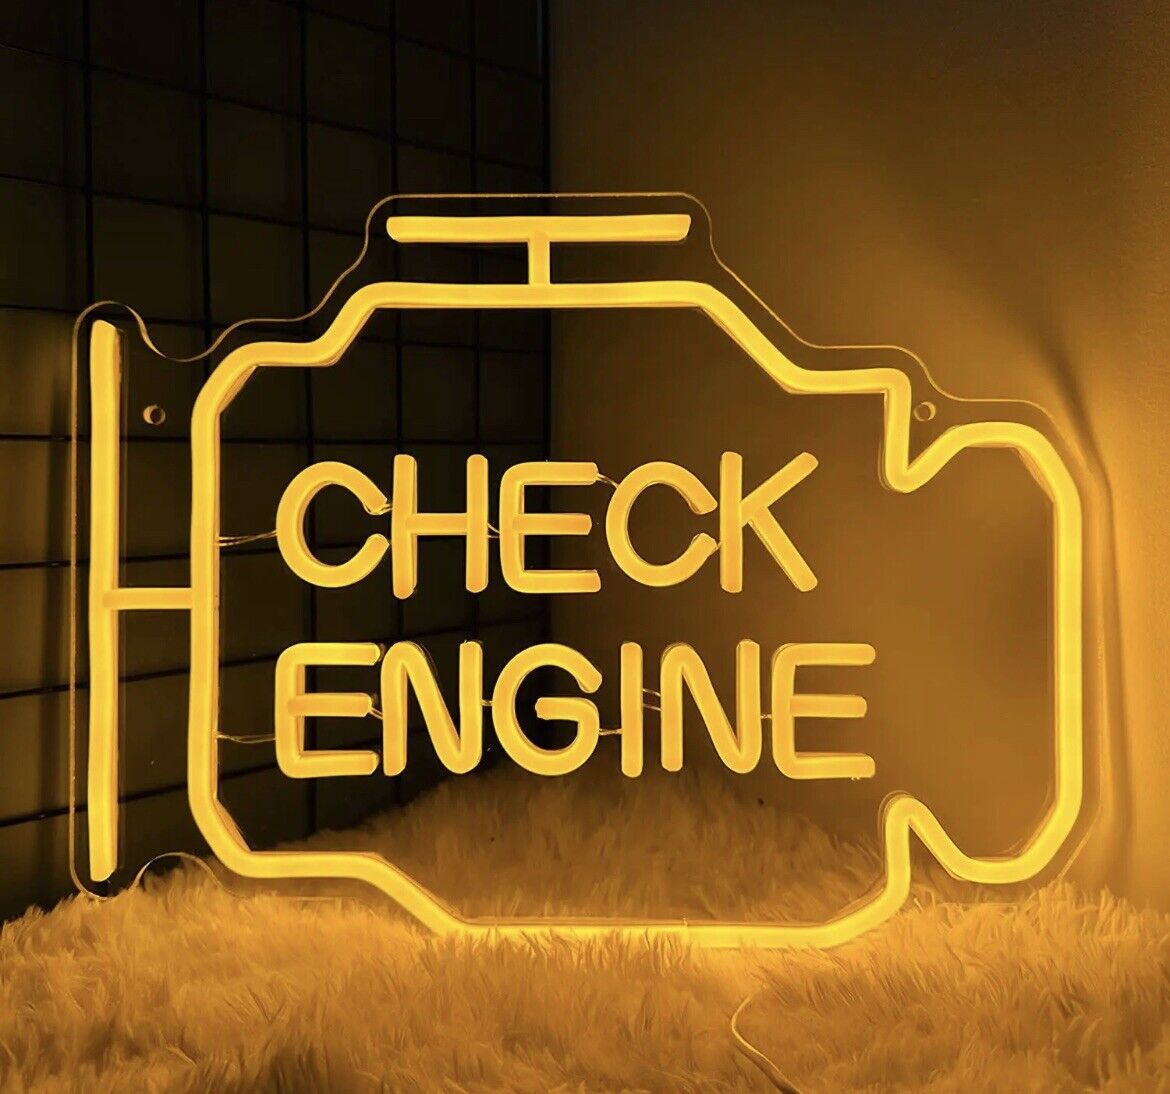 Check Engine Neon Signs,LED Garage Neon Sign for Wall Decor,Custom Light up Sign